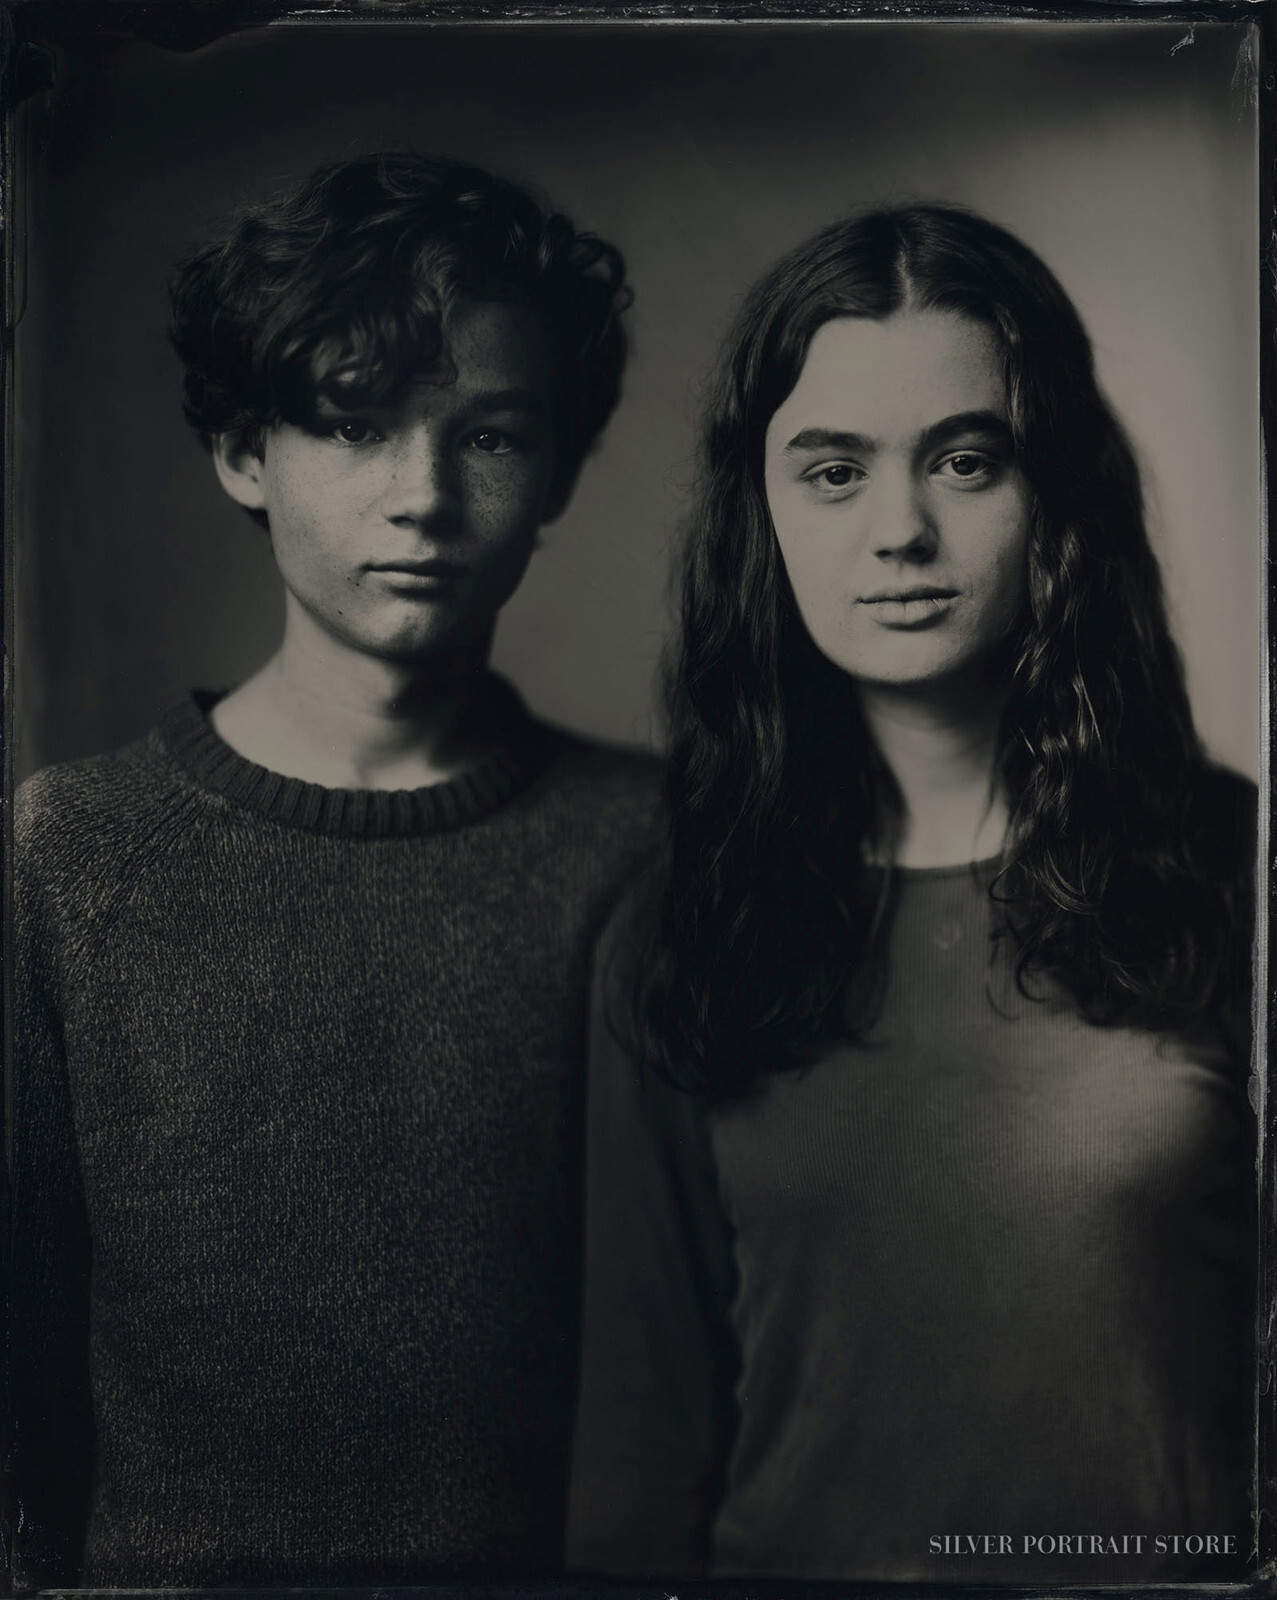 Quinten & Nina-Silver Portrait Store-scan from Wet plate collodion-Tintype 20 x 25 cm.